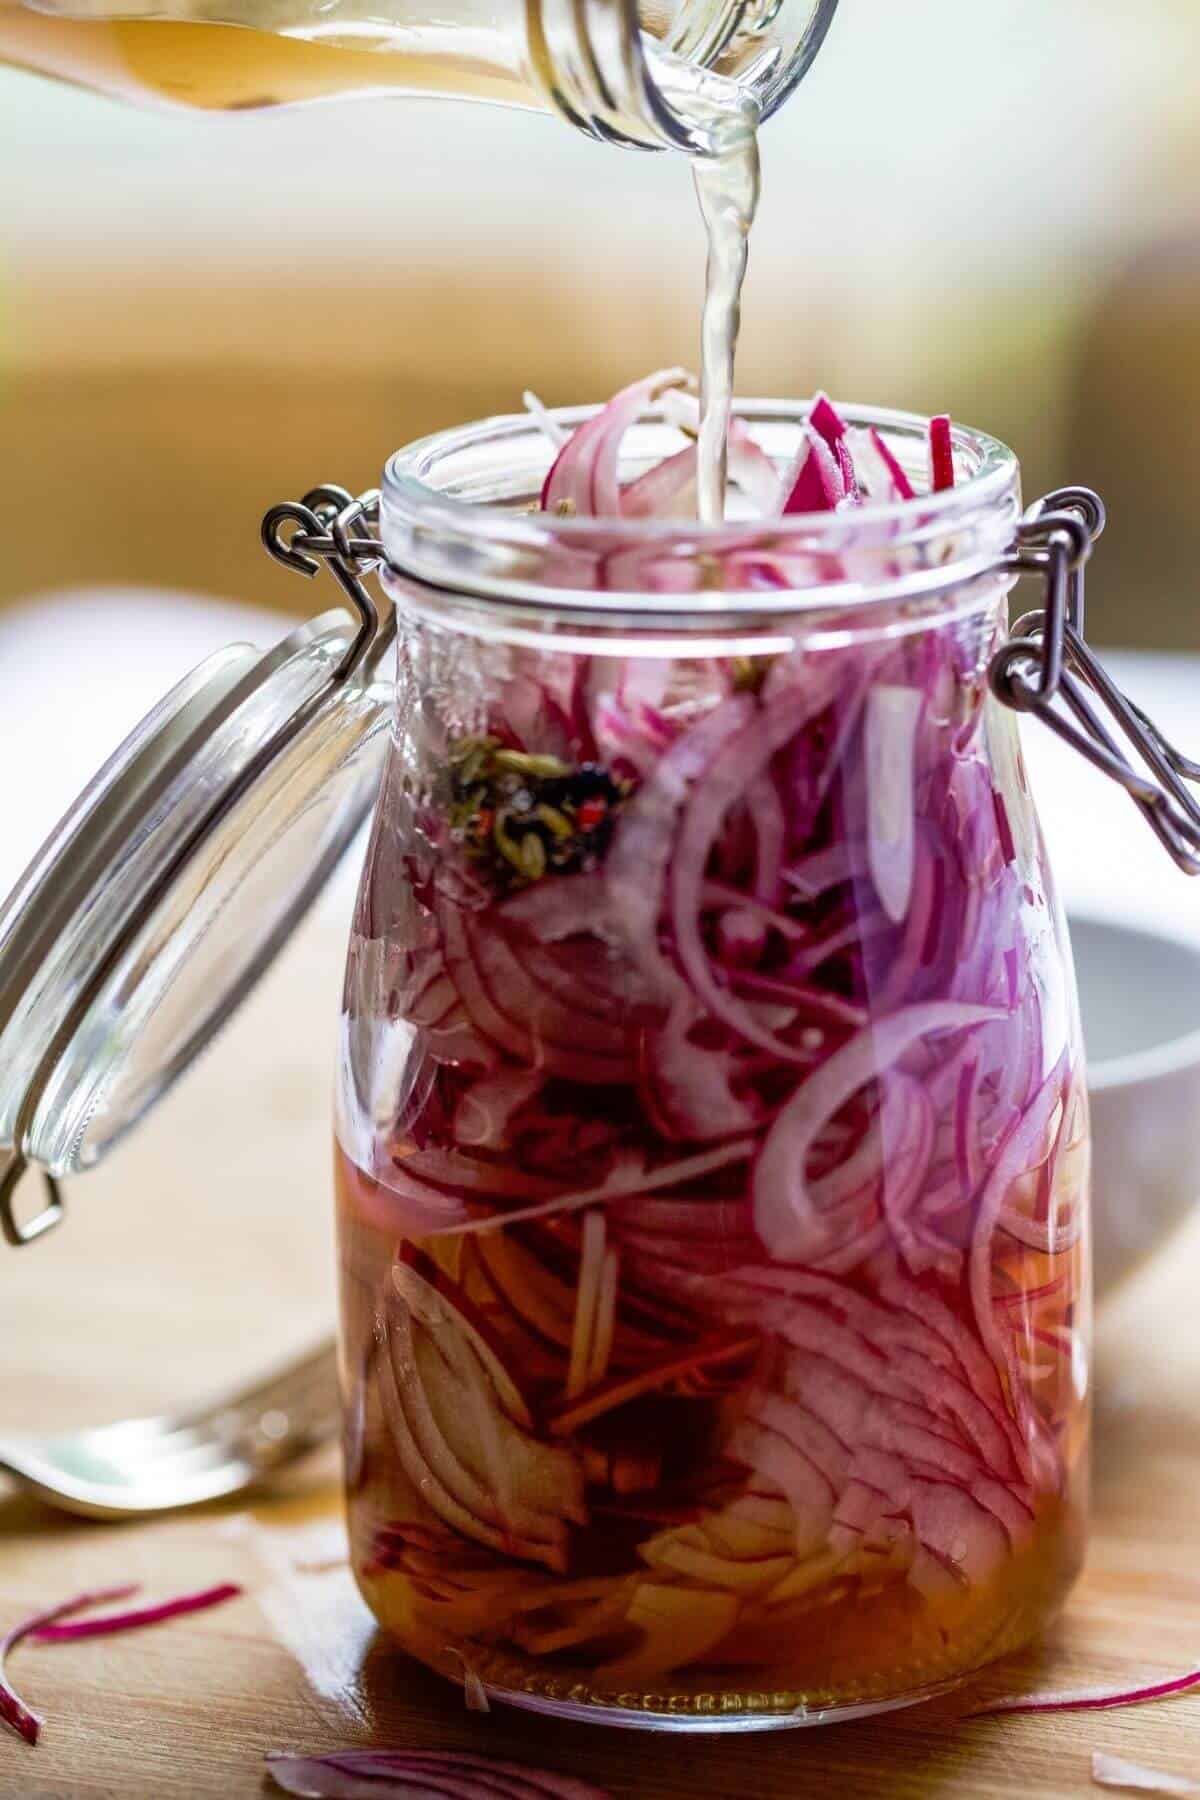 Vinegar is being poured into a mason jar filled with red onion slices.